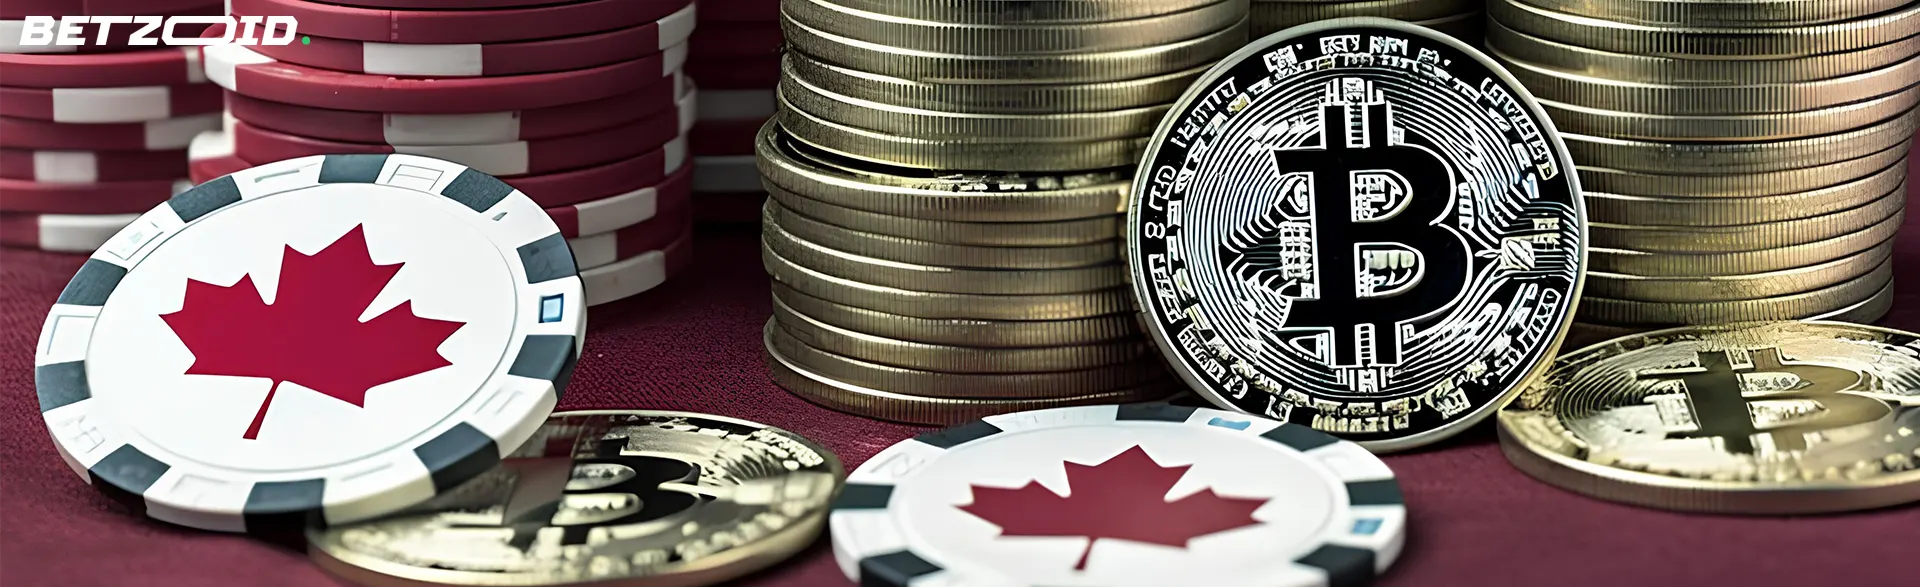 Stacks of coins, poker chips with a Canadian flag, and Bitcoin, illustrating the popularity of Bitcoin betting sites in Canada.